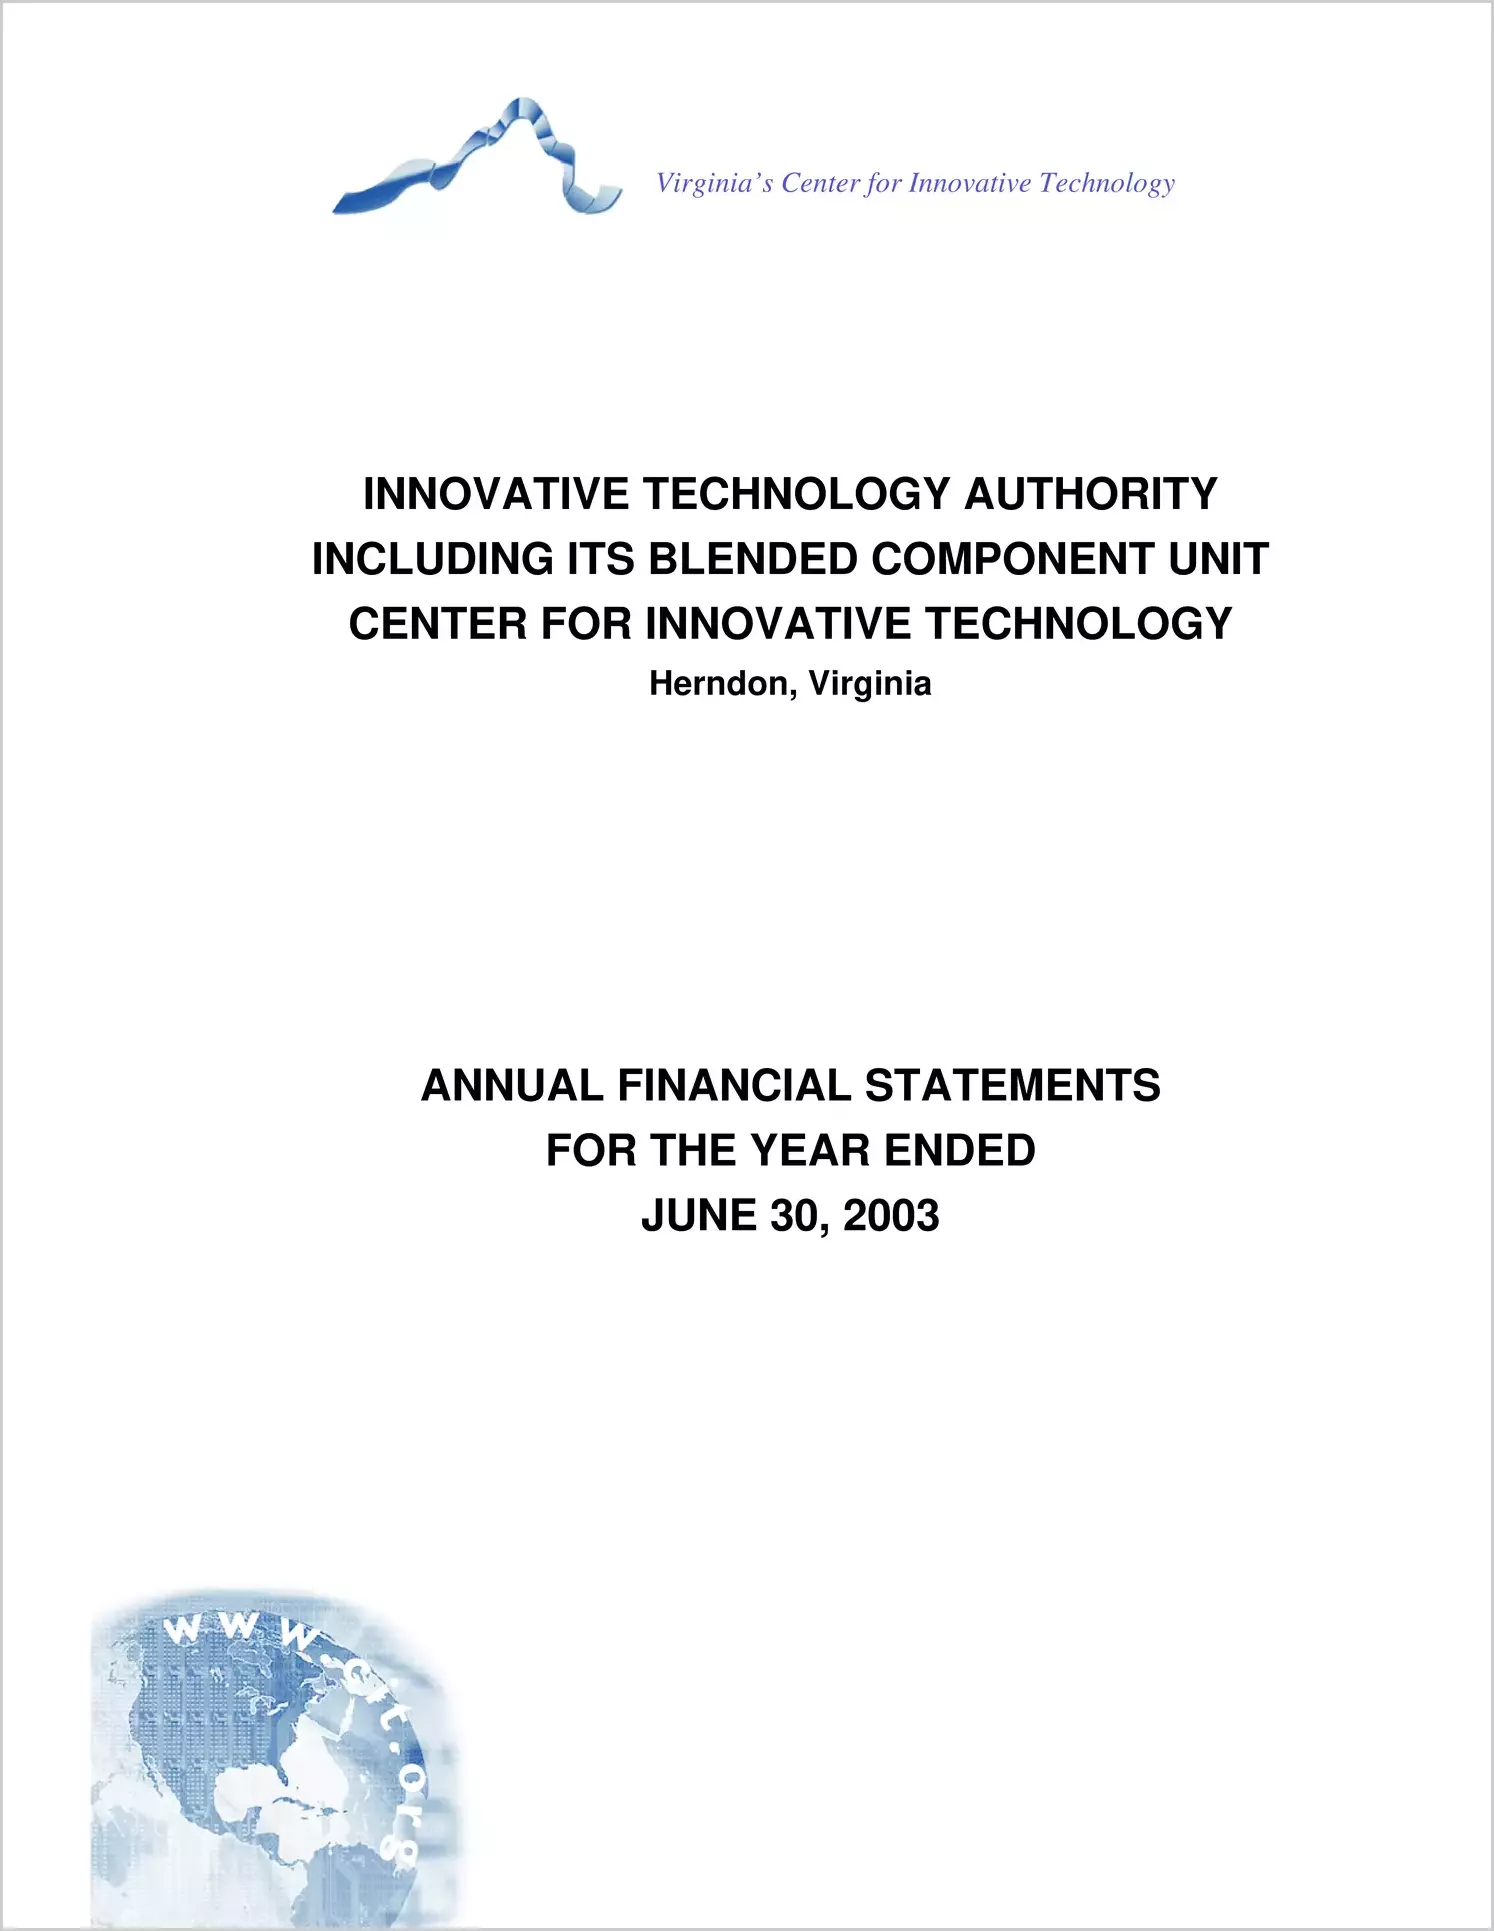 Innovative Technology Authority including its blended component unit (the Center for Innovative Technology) for the year ended June 30, 2003